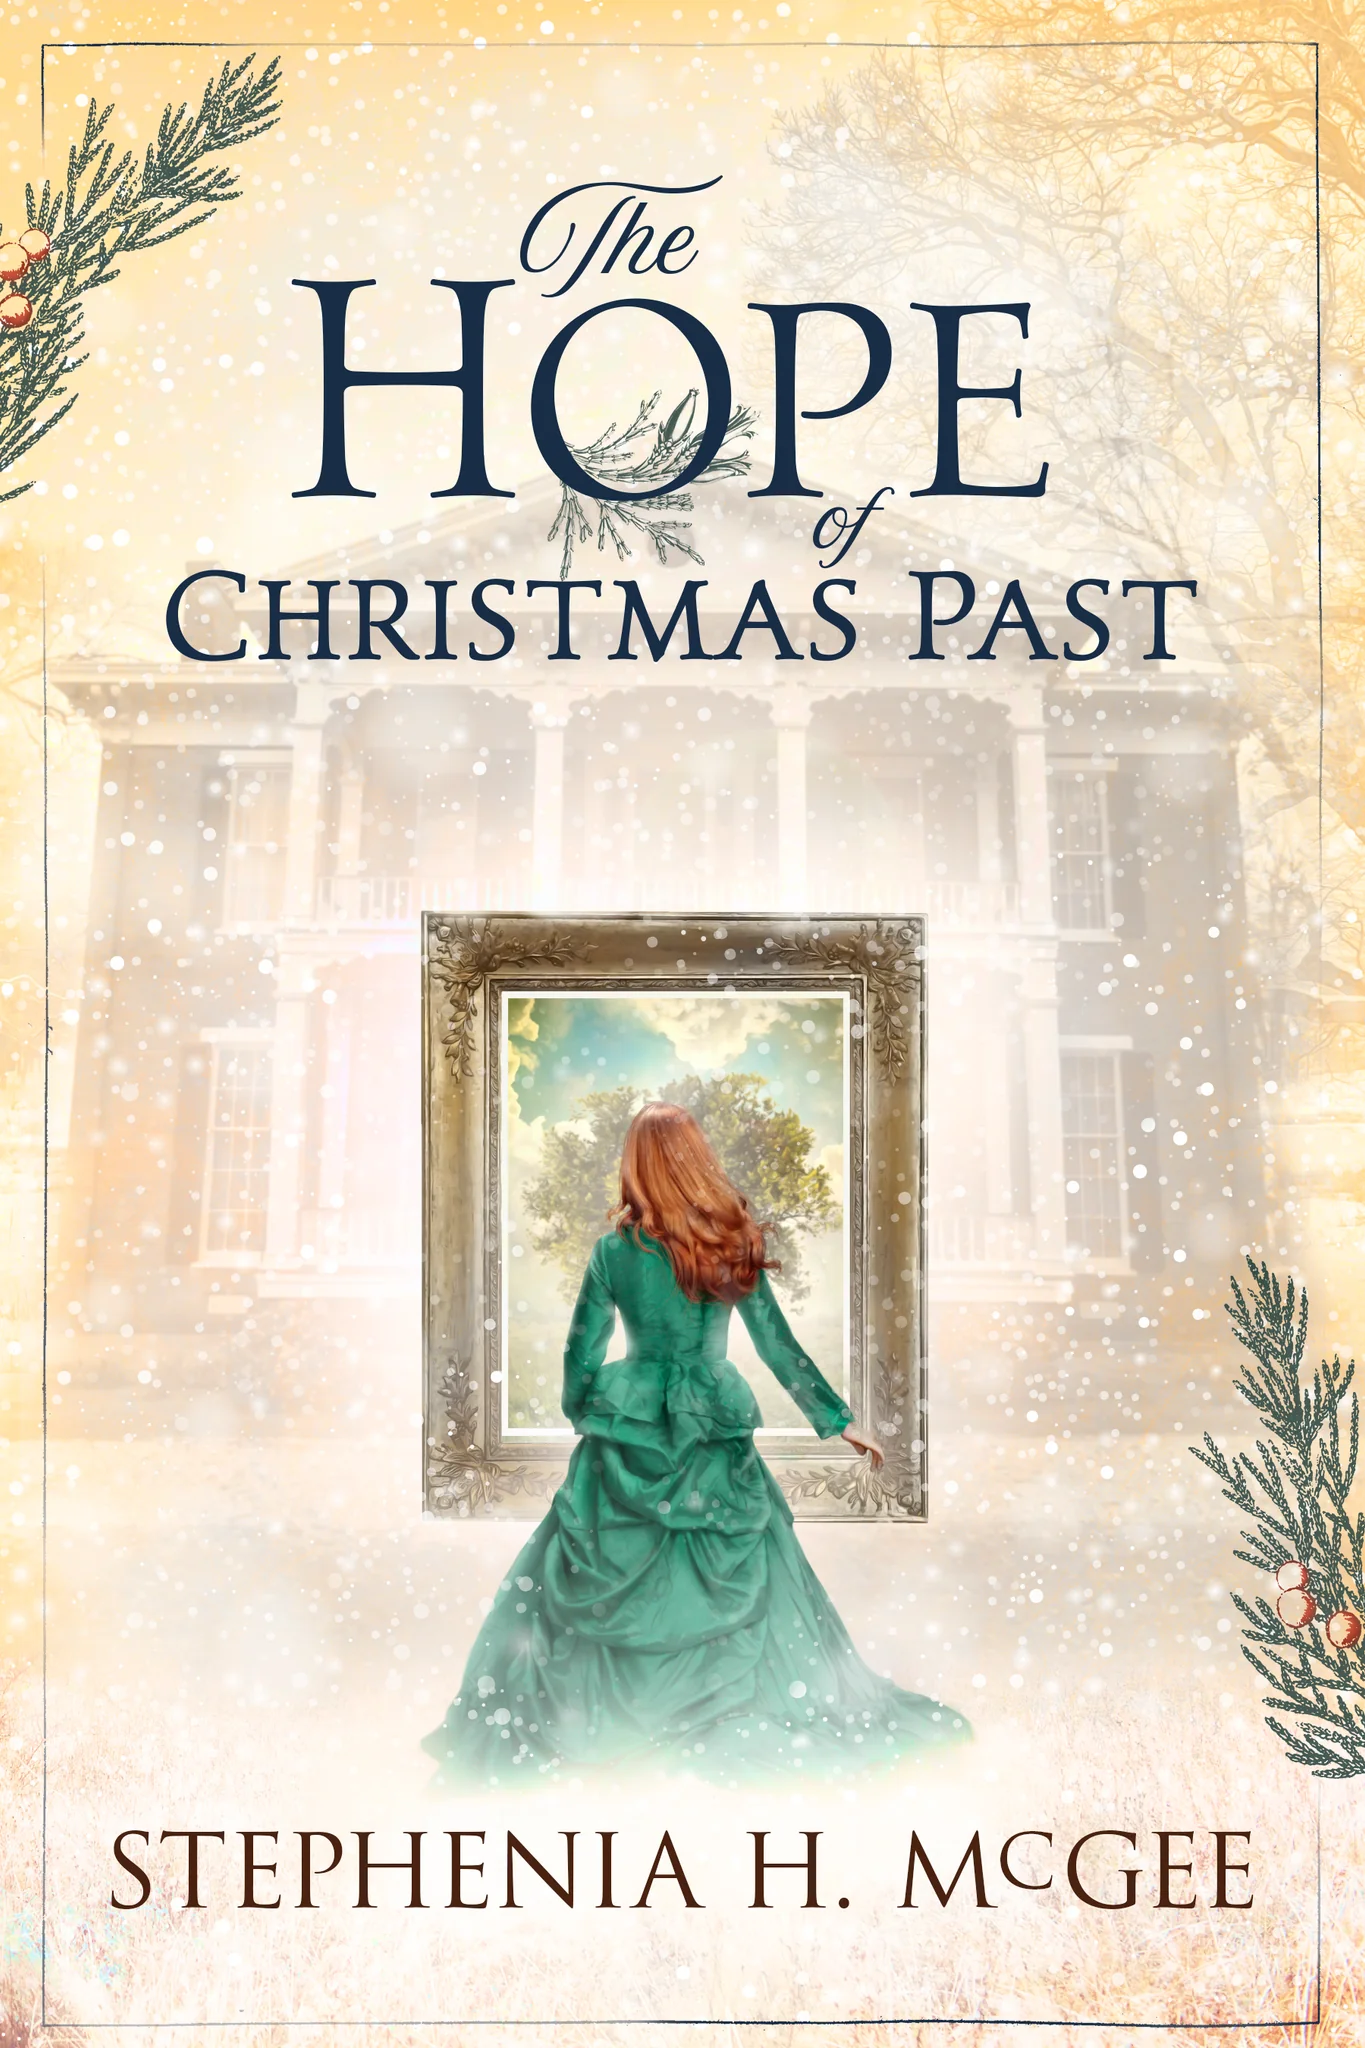 Featured image for “The Hope of Christmas Past”